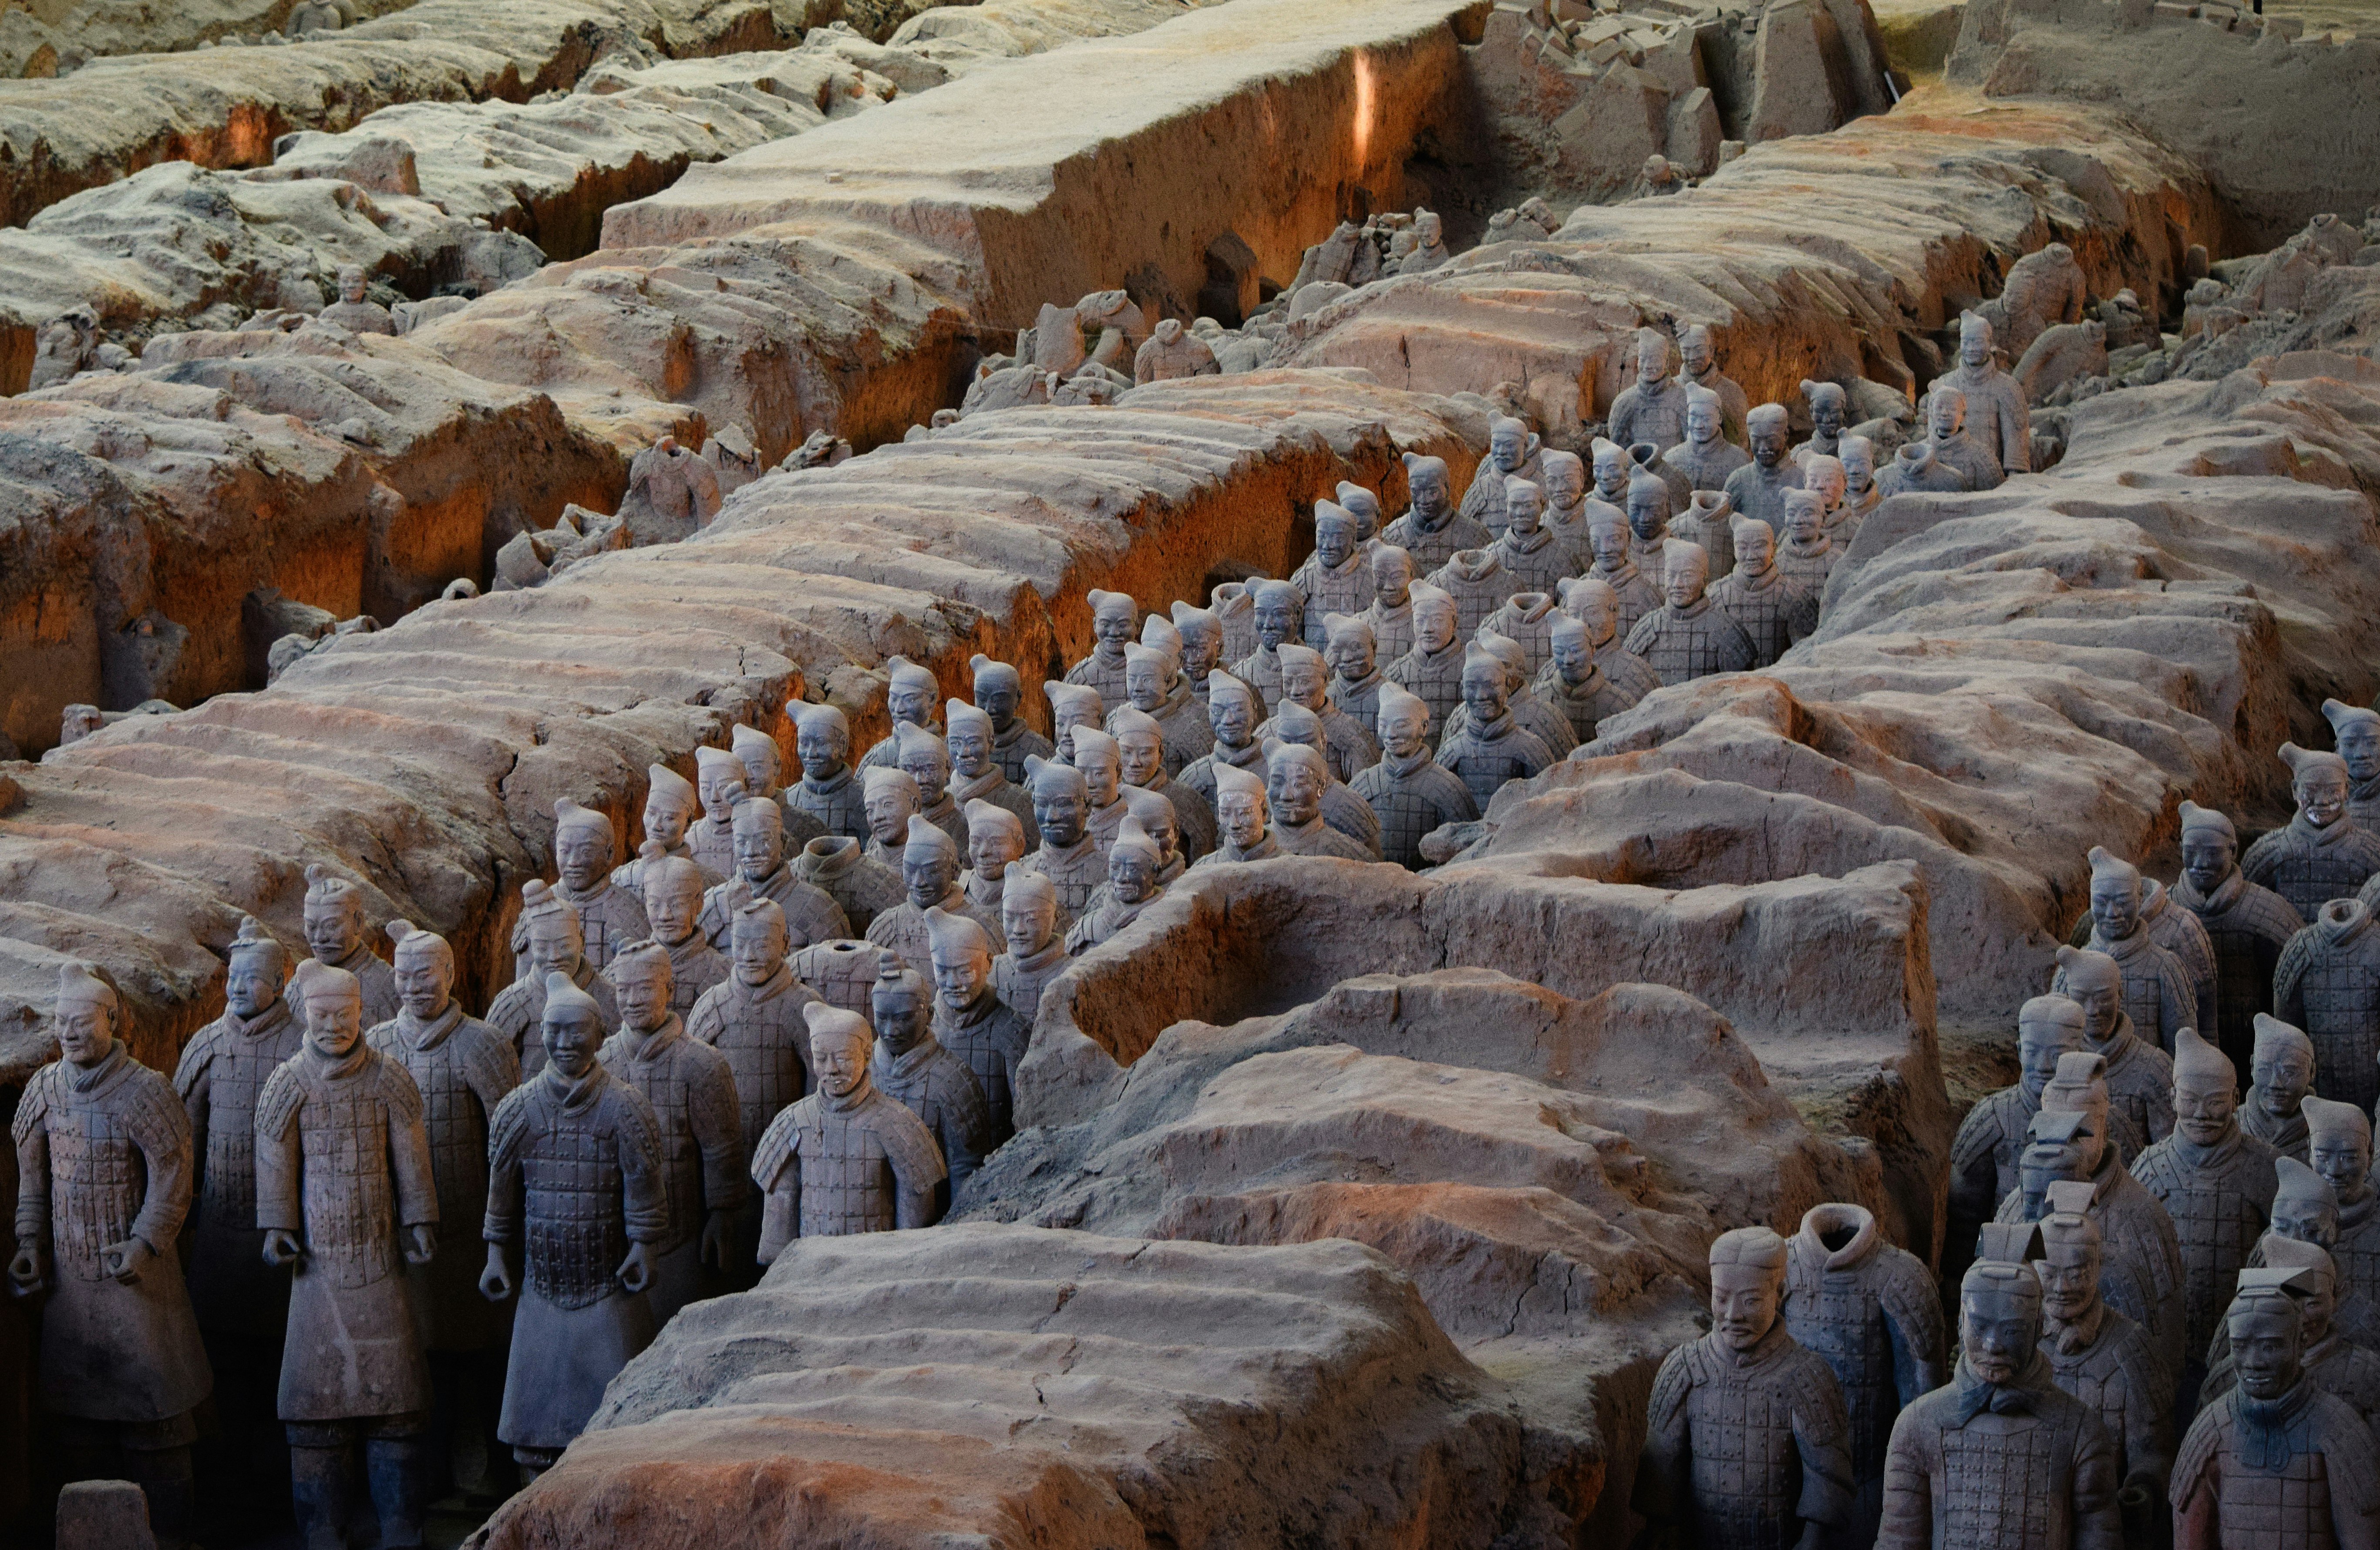 In today’s world of easy access information and increasingly amazing imagery you can often be left underwhelmed when seeing something in reality, It was a plesant surprise to find the Terracotta Army did not just live up to the hype but thoroughly exceeded it, a truly awe inspiring site that they have only just scratched the surface of  

The scale of the site and in particular what is still under the ground is mind bending